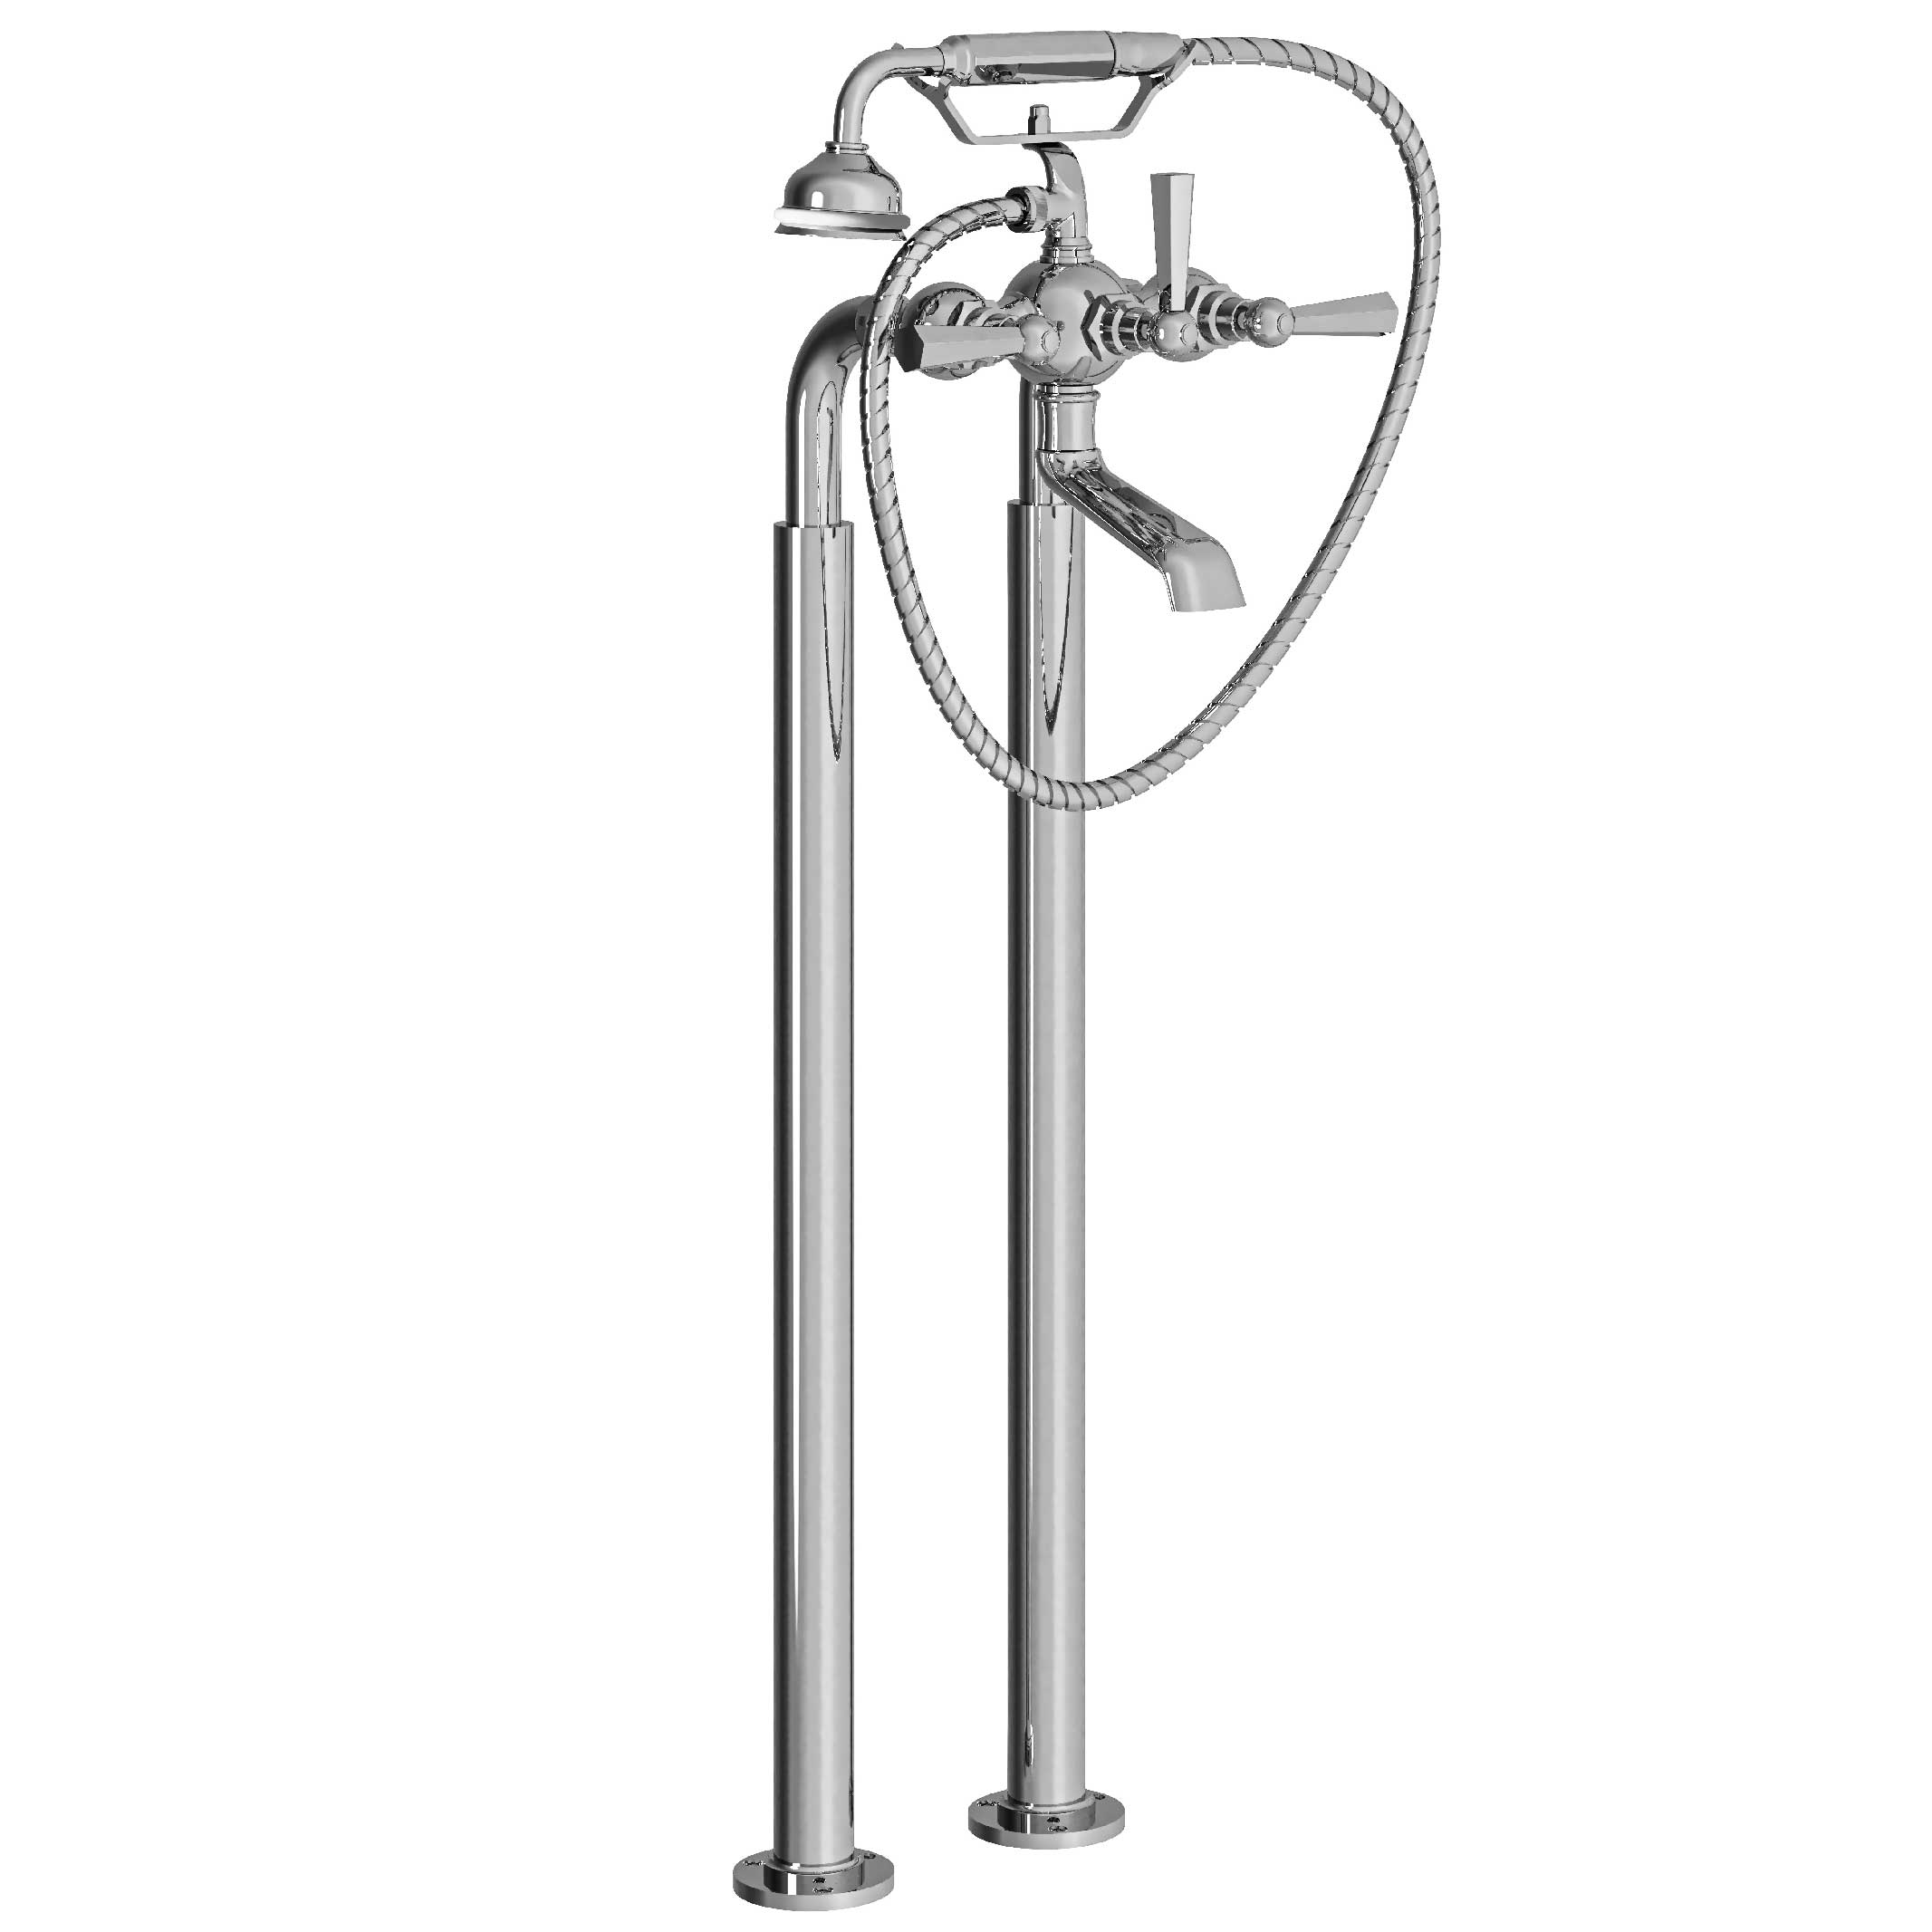 M39-3309 Floor mounted bath and shower mixer